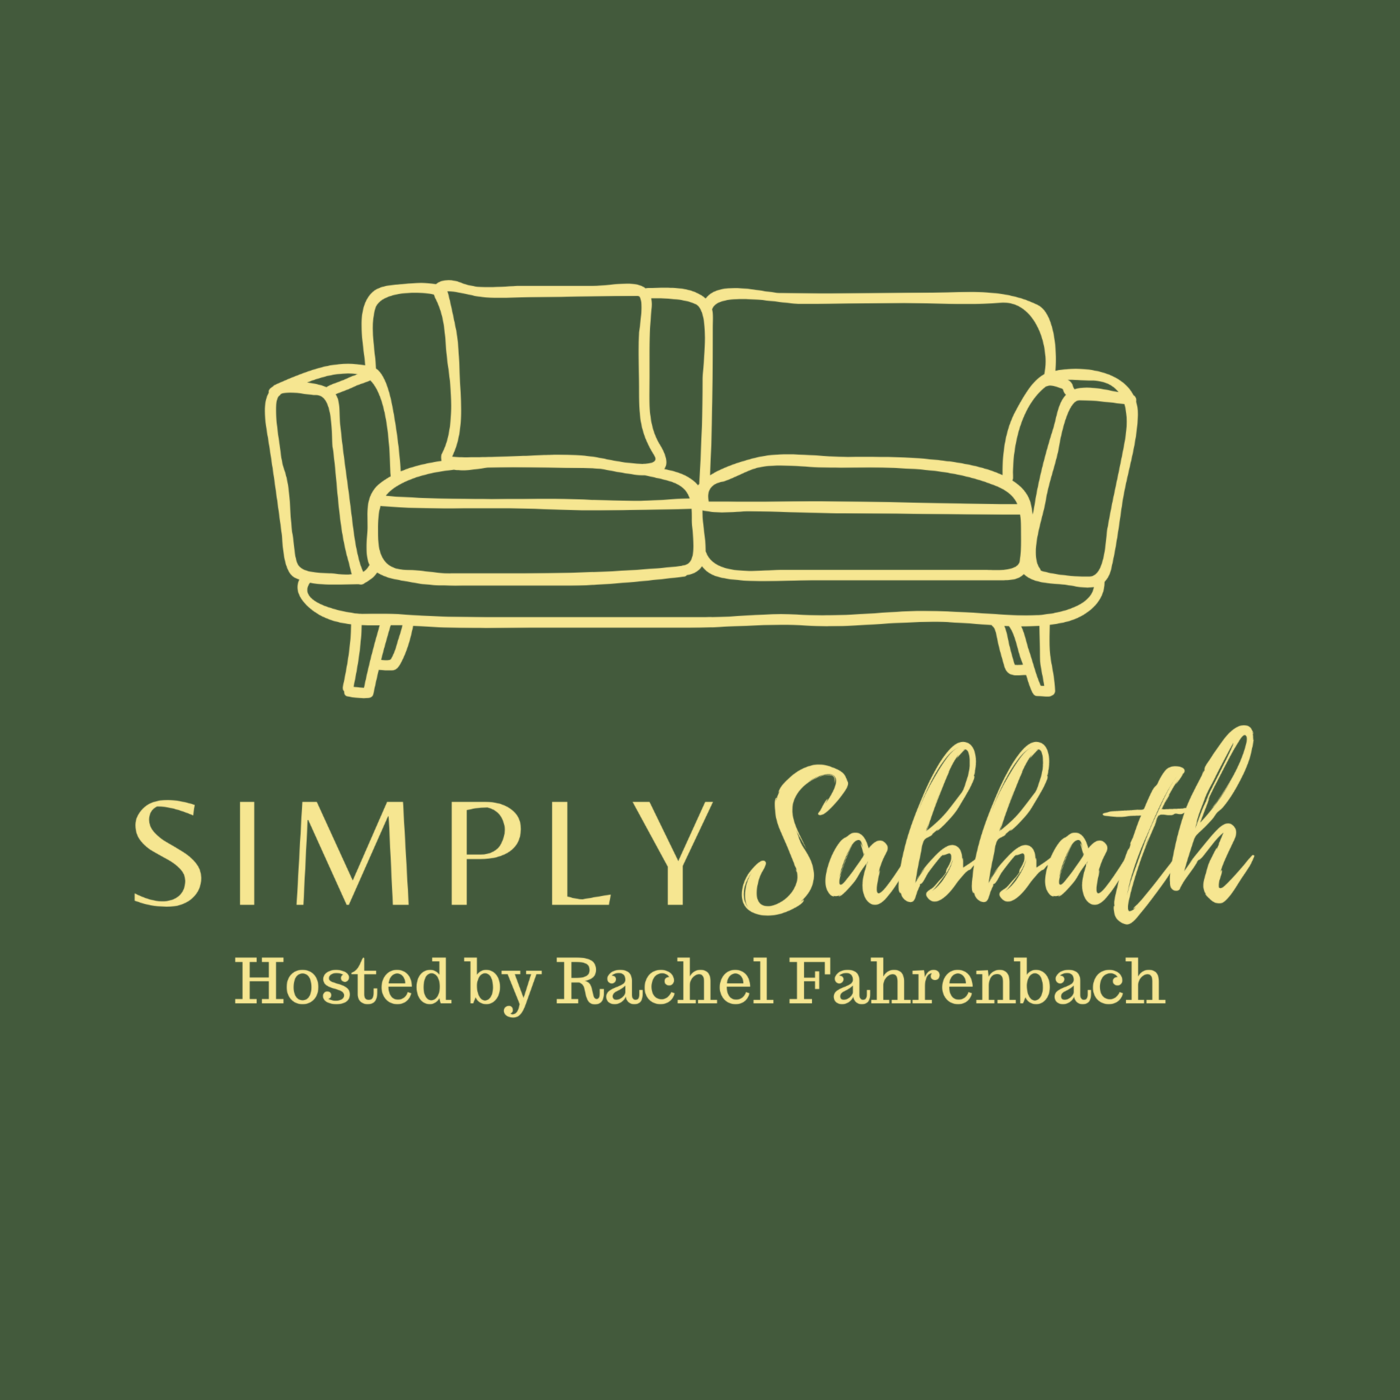 Ep 40 - Ministry Leaders & the Sabbath with Cristi Schroeder